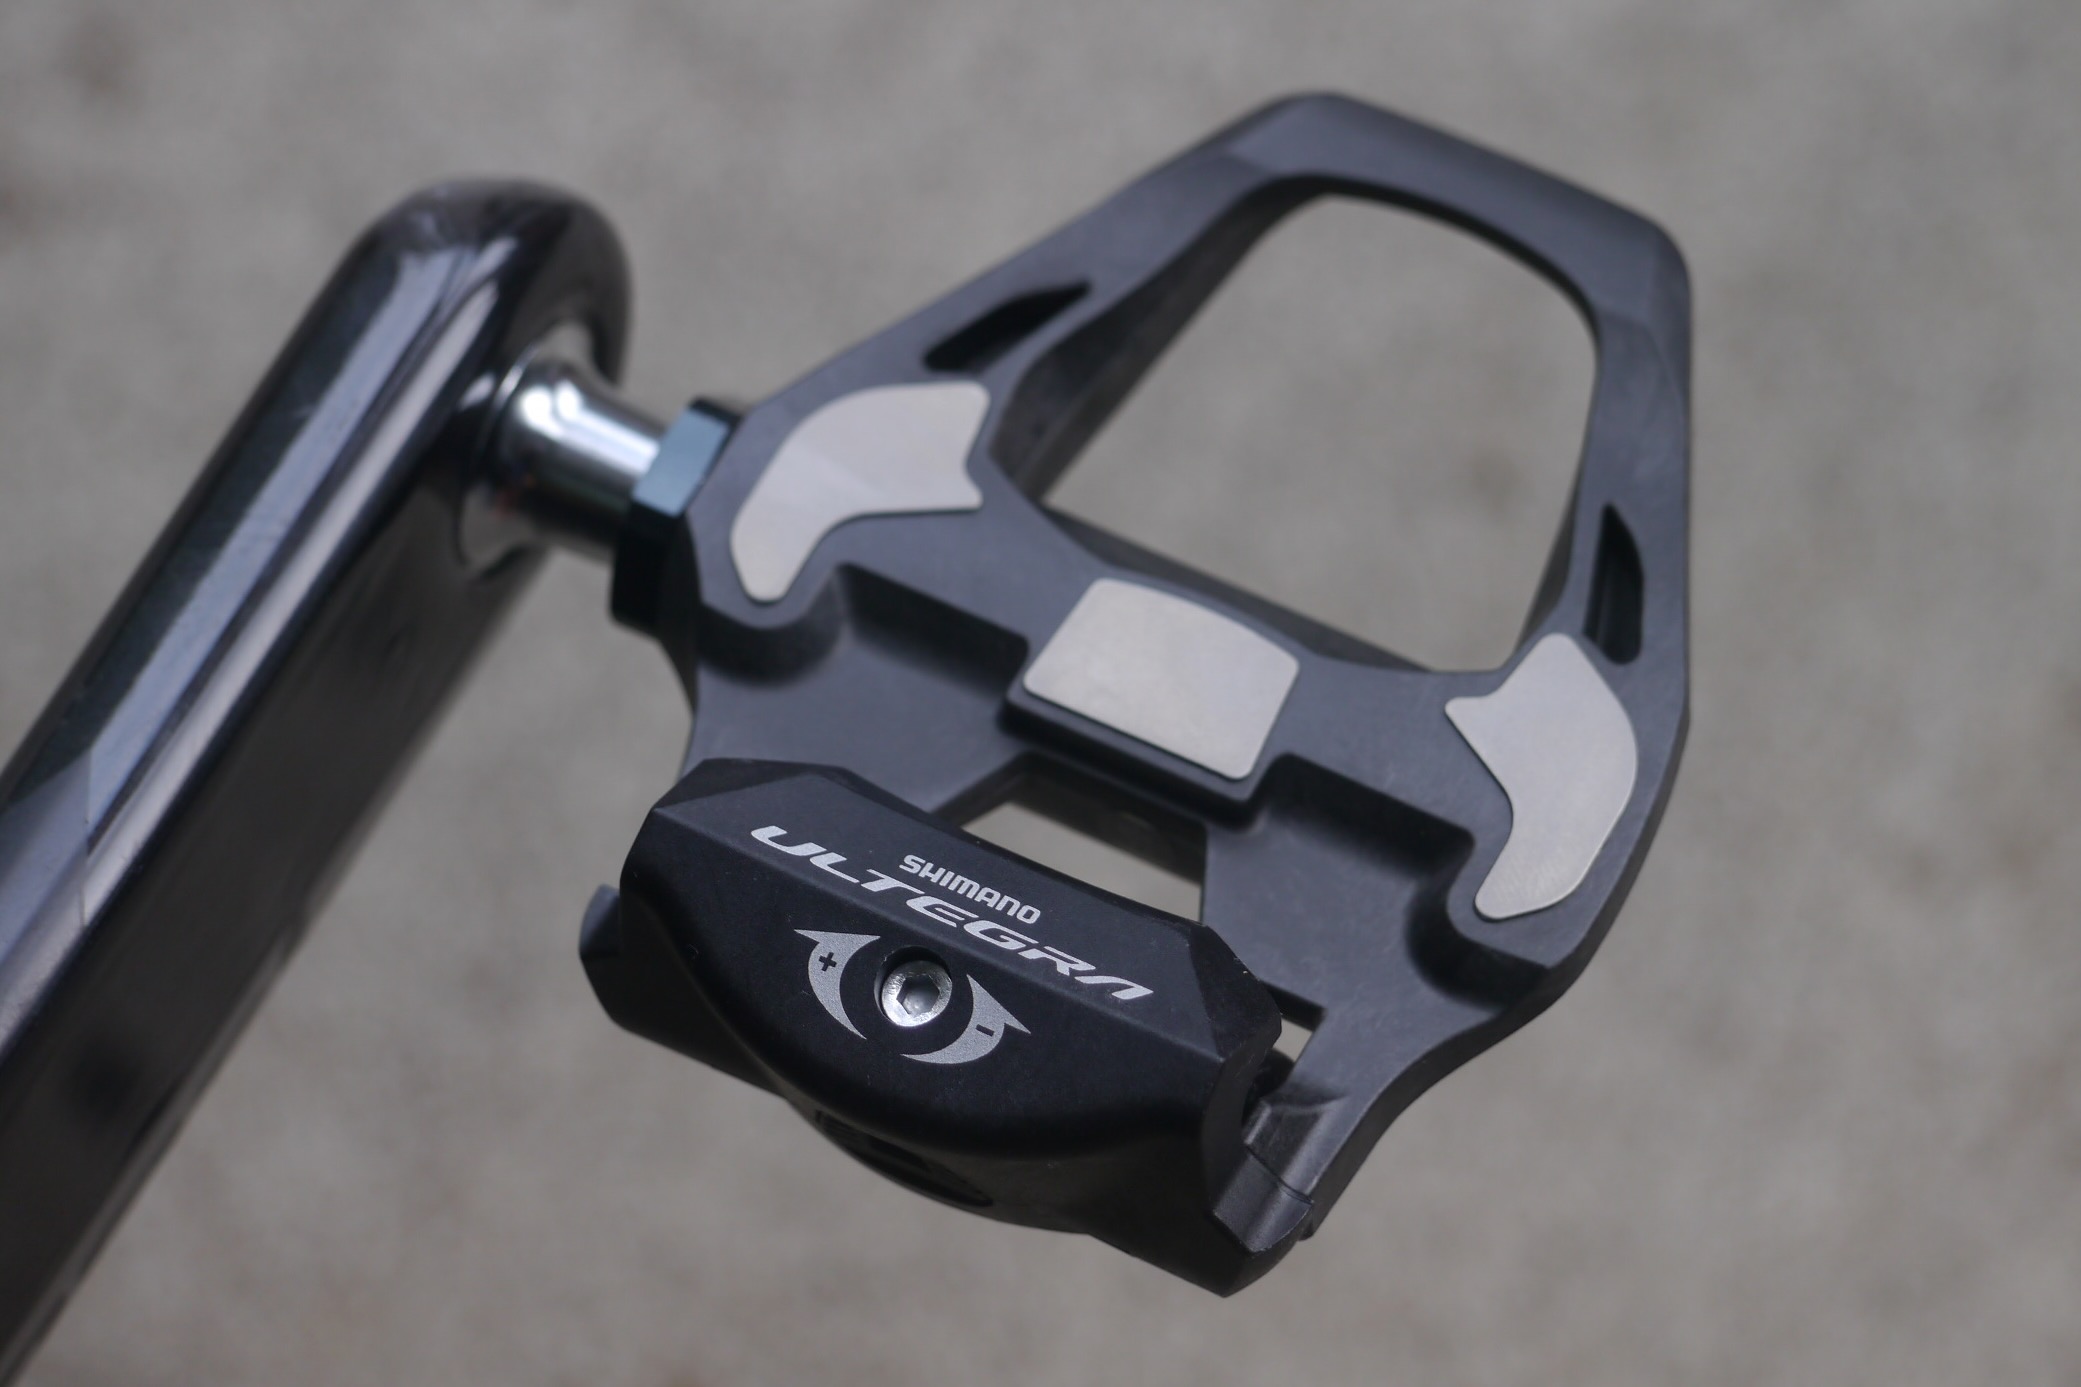 The retention adjustment on the Shimano Ultegra road bike pedals